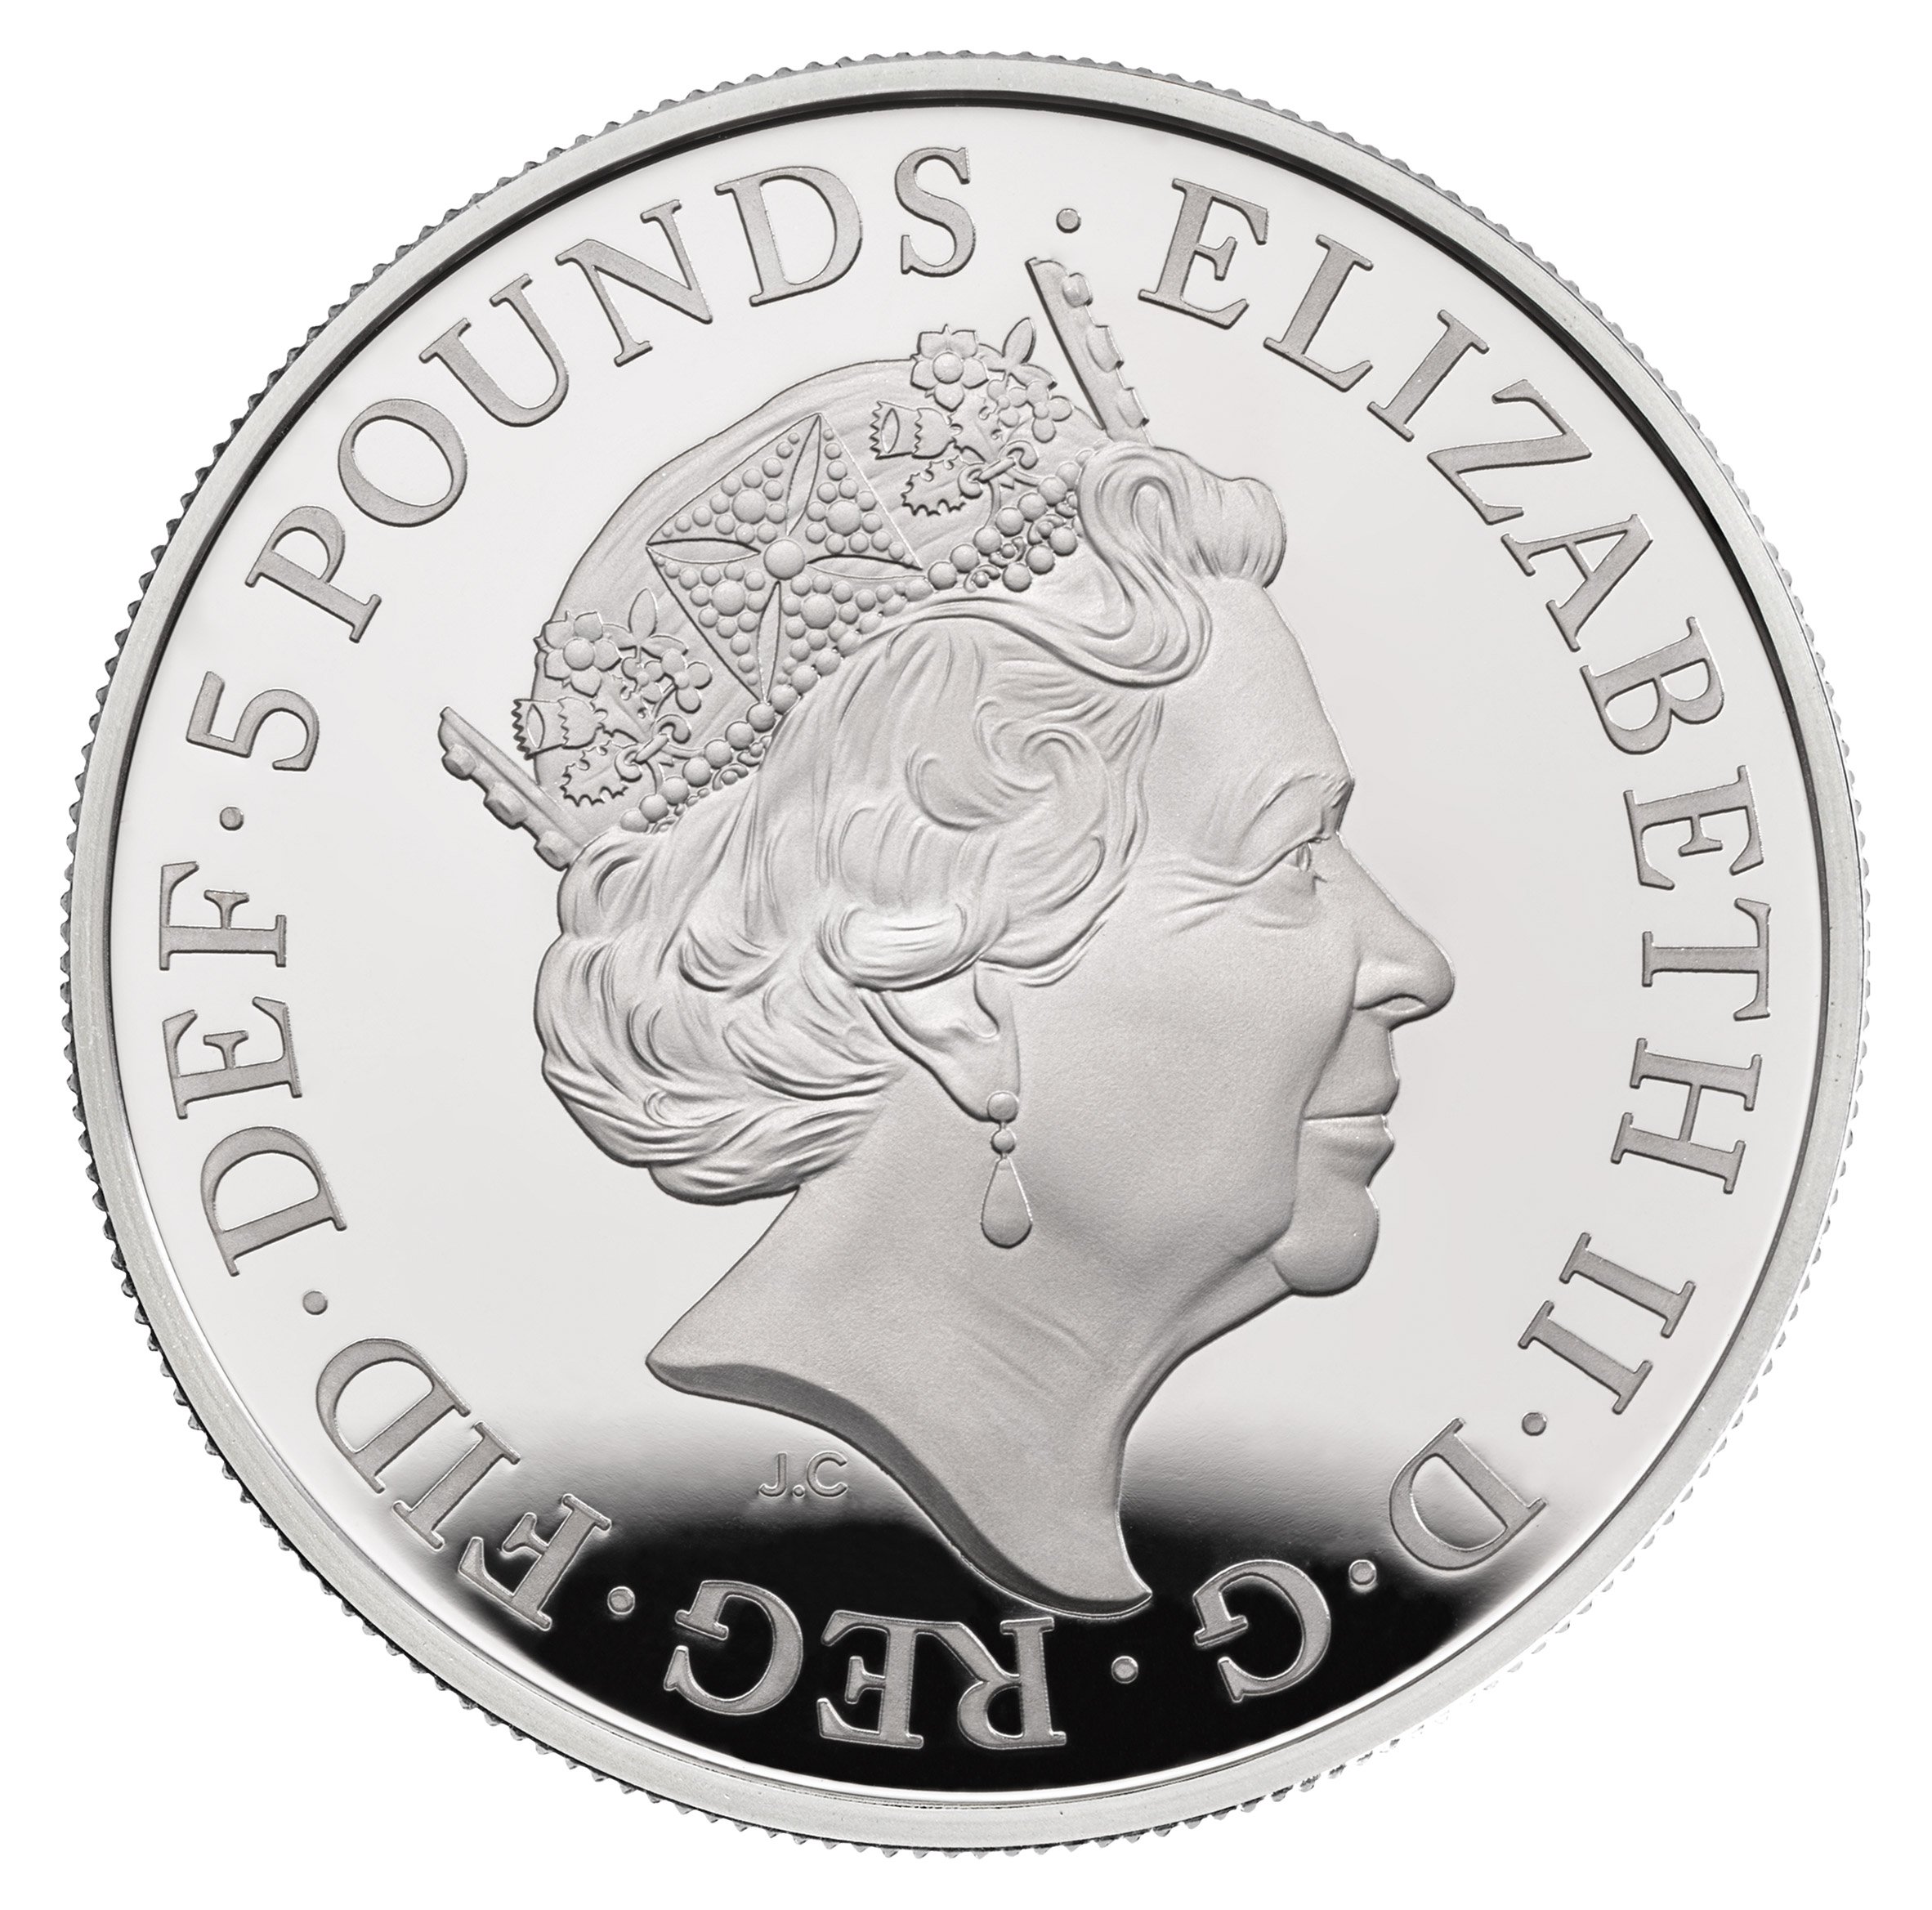 David Chipperfield designs £5 coin to mark Royal Academy of Arts' 250th anniversary